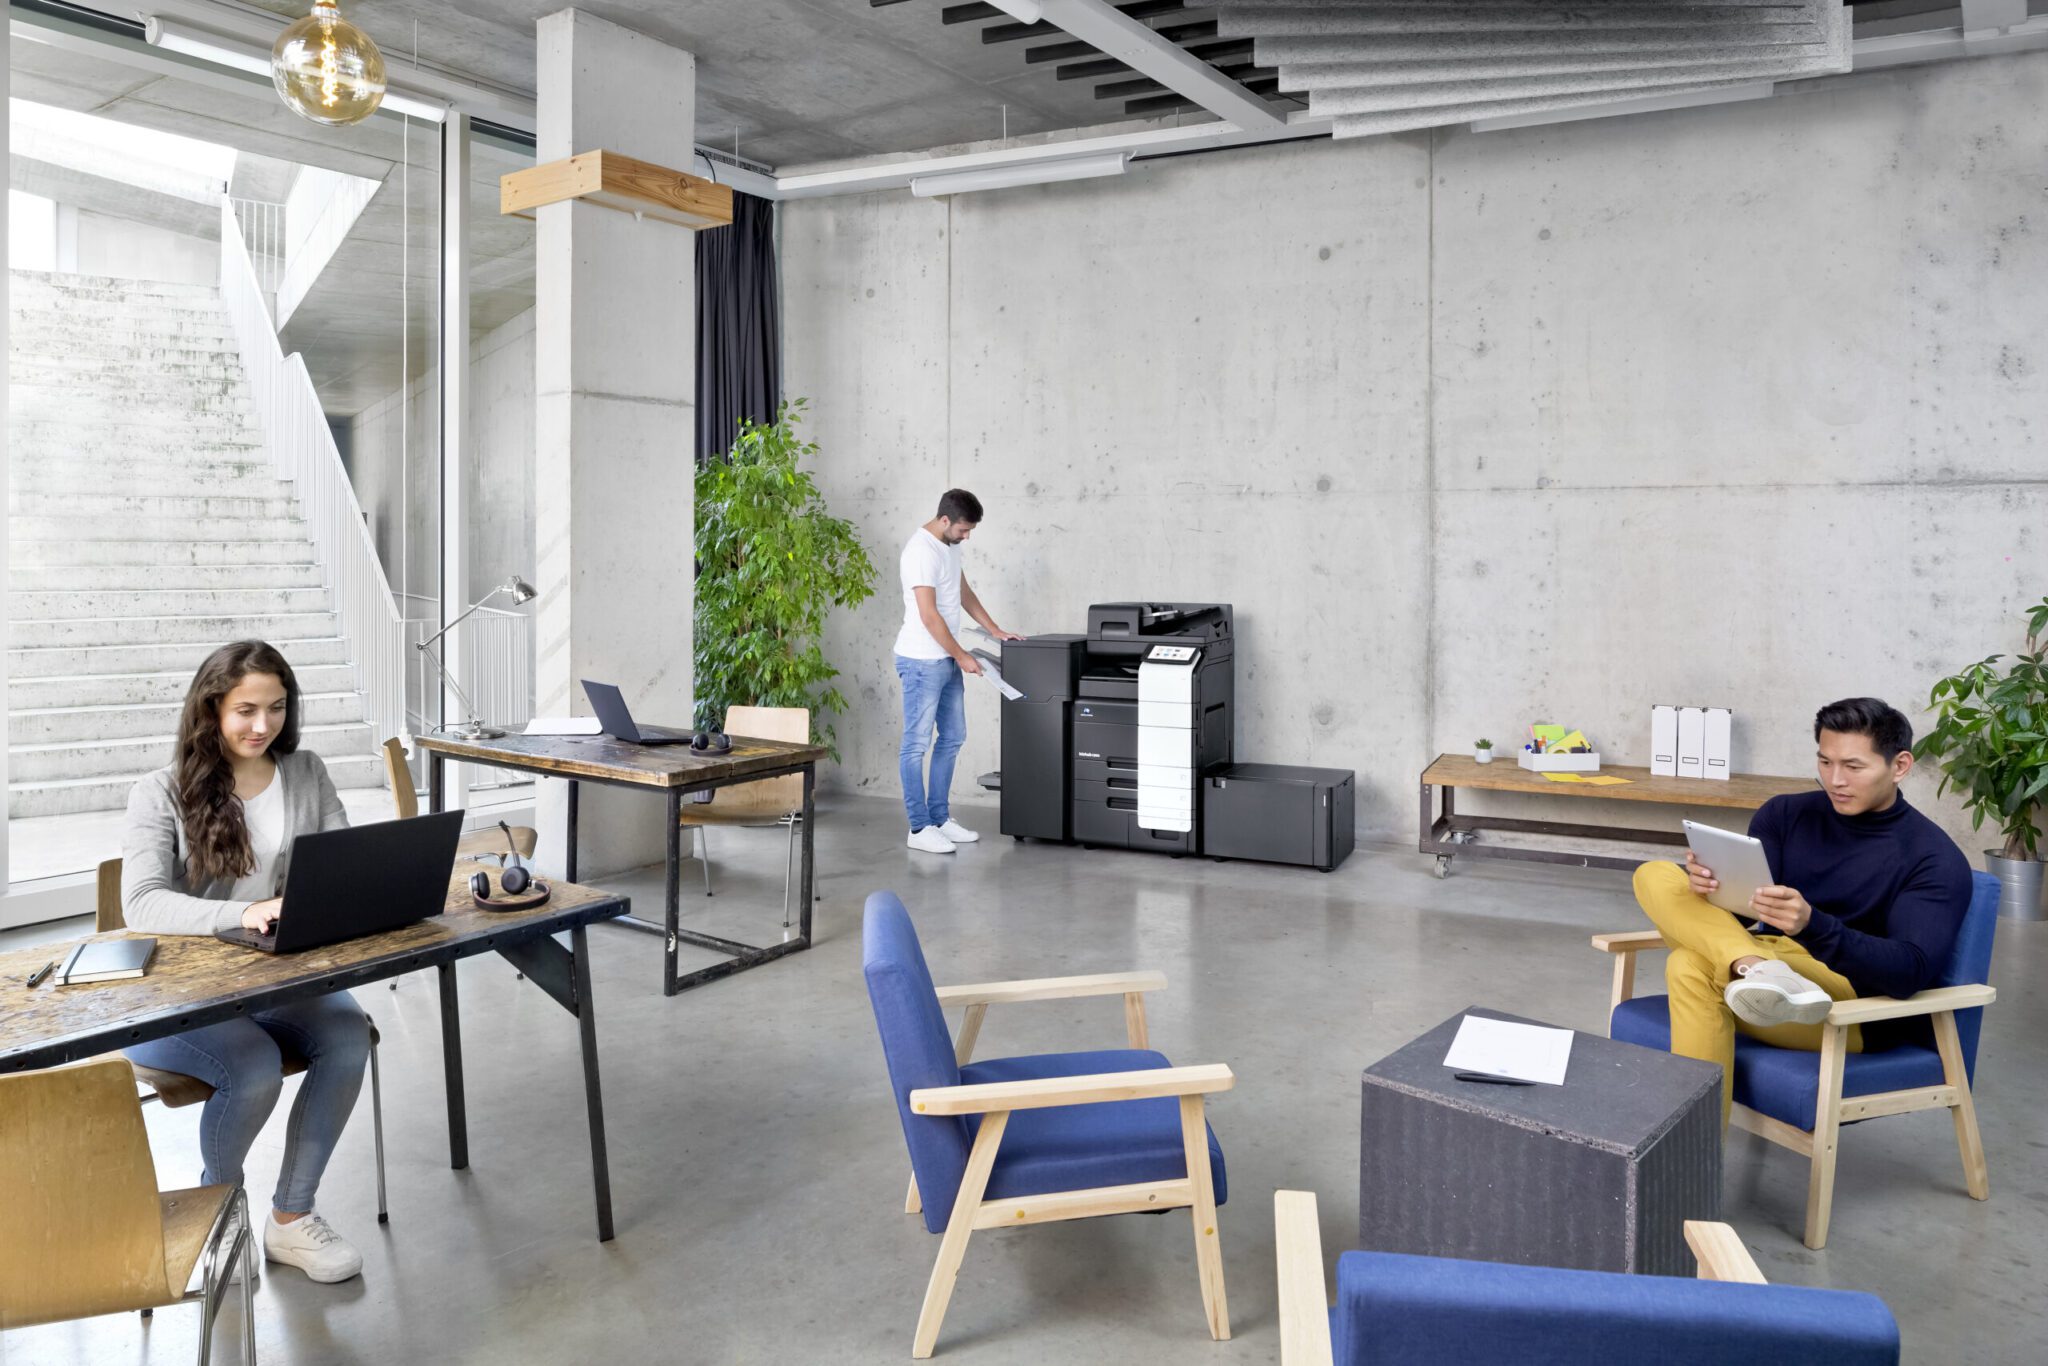 Rethink how a Printer can be at the Heart of your Workspace